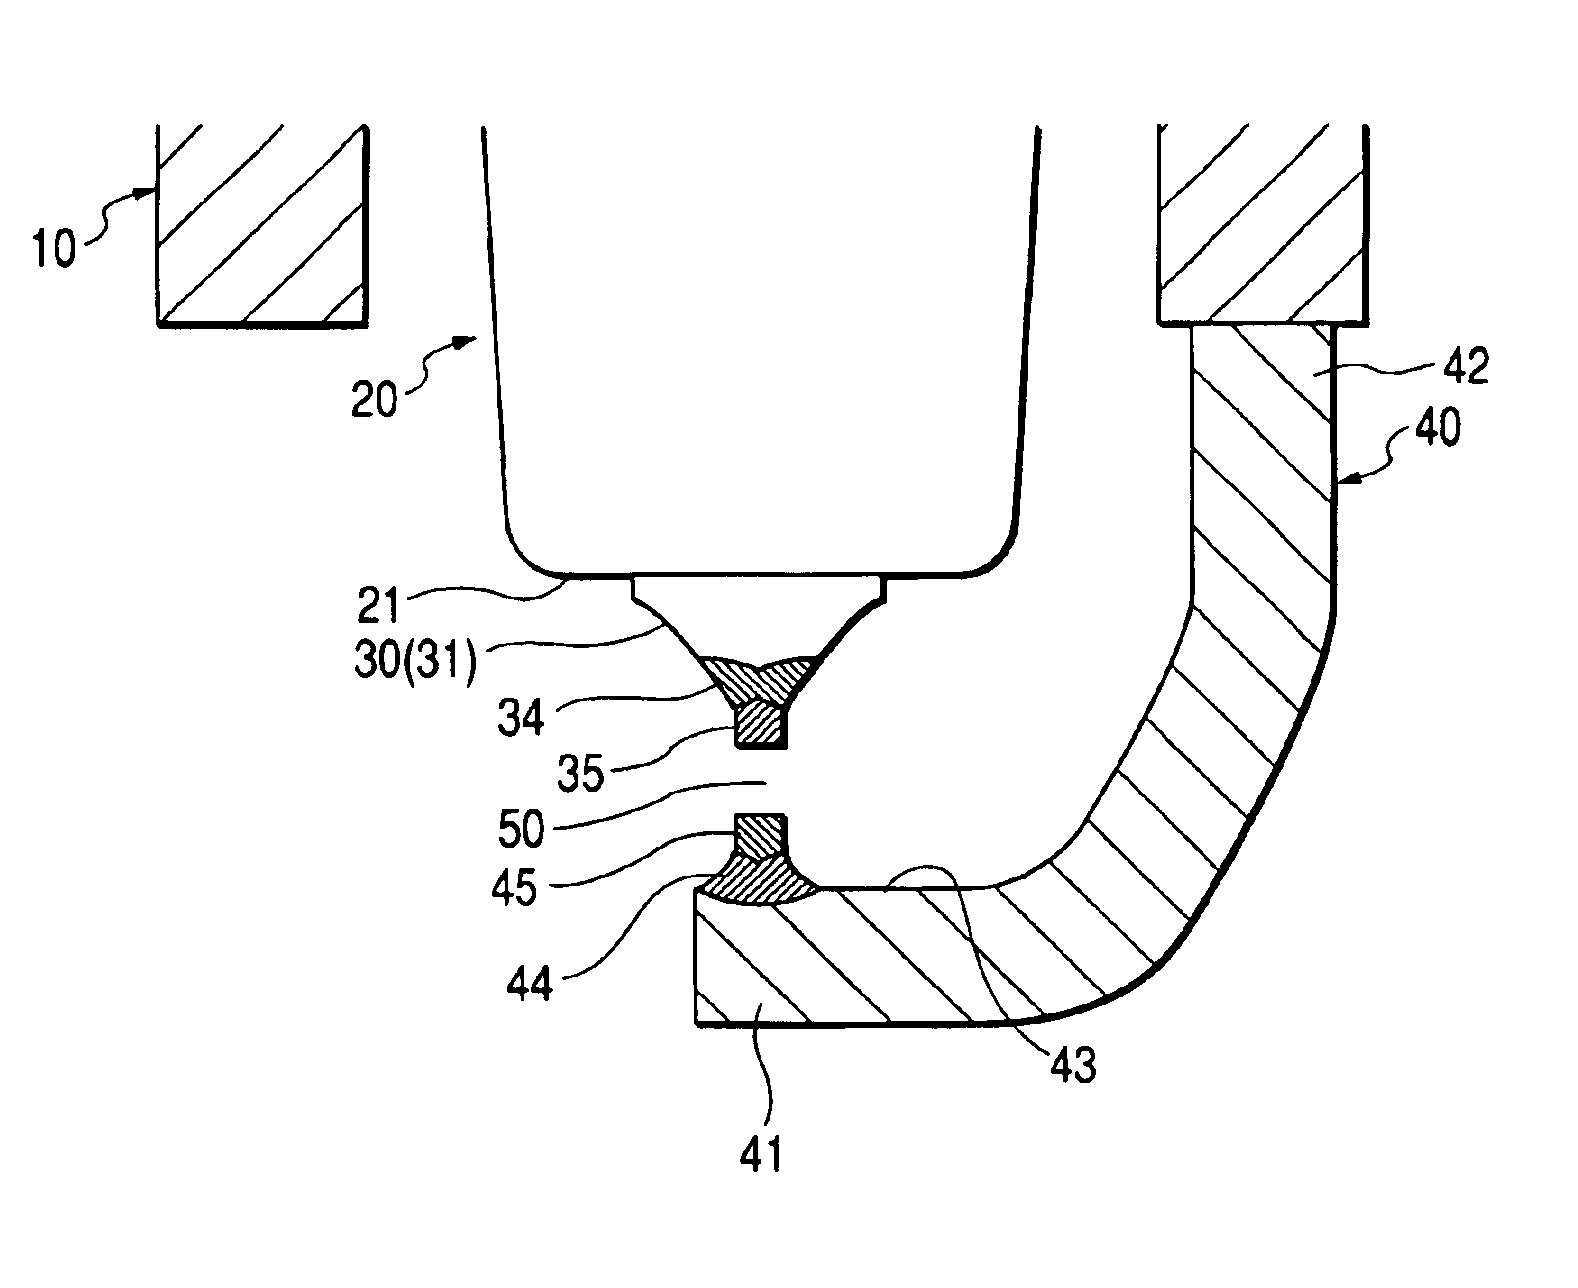 Structure of spark plug designed to provide higher durability and ignitability of fuel